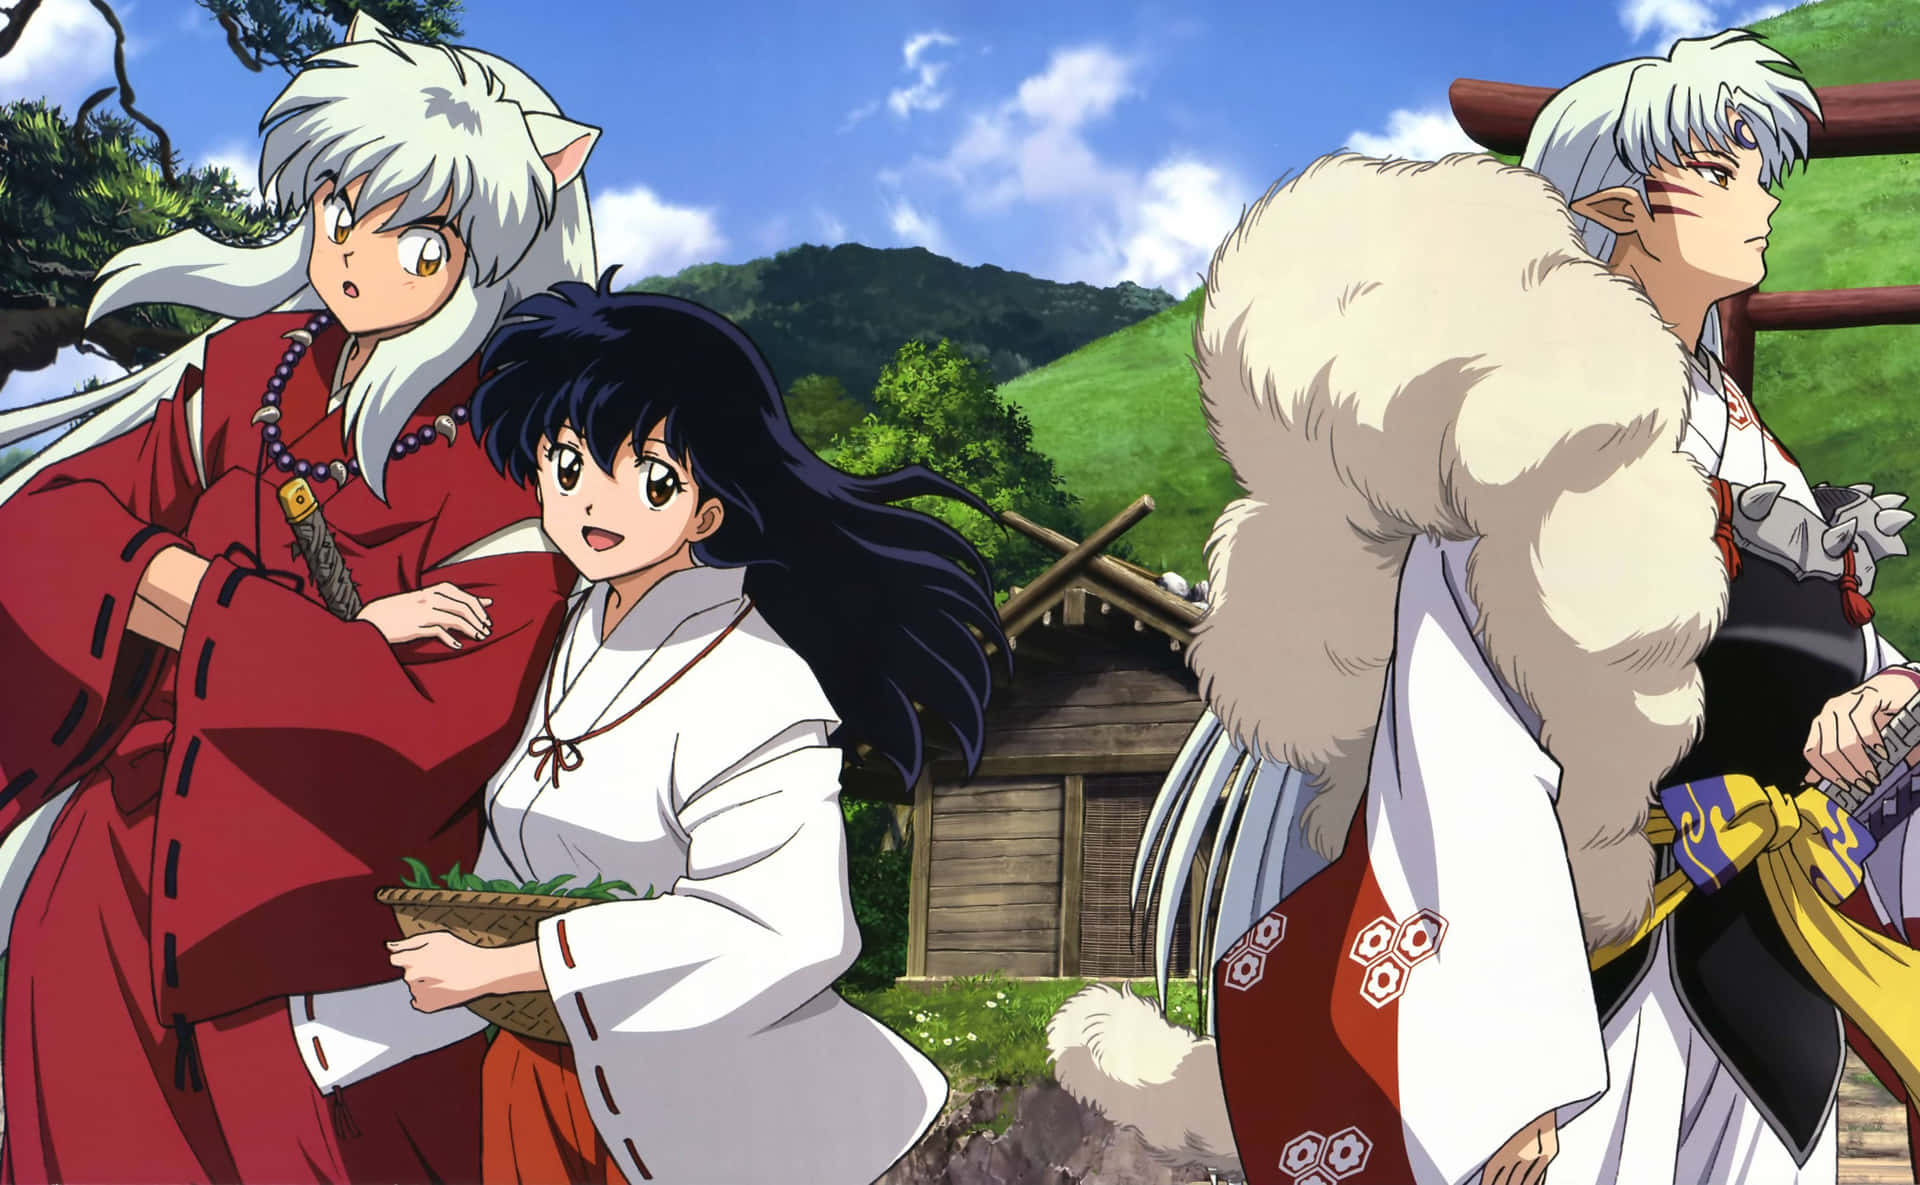 Sesshomaru, The Powerful Demon Lord In A Striking Stance